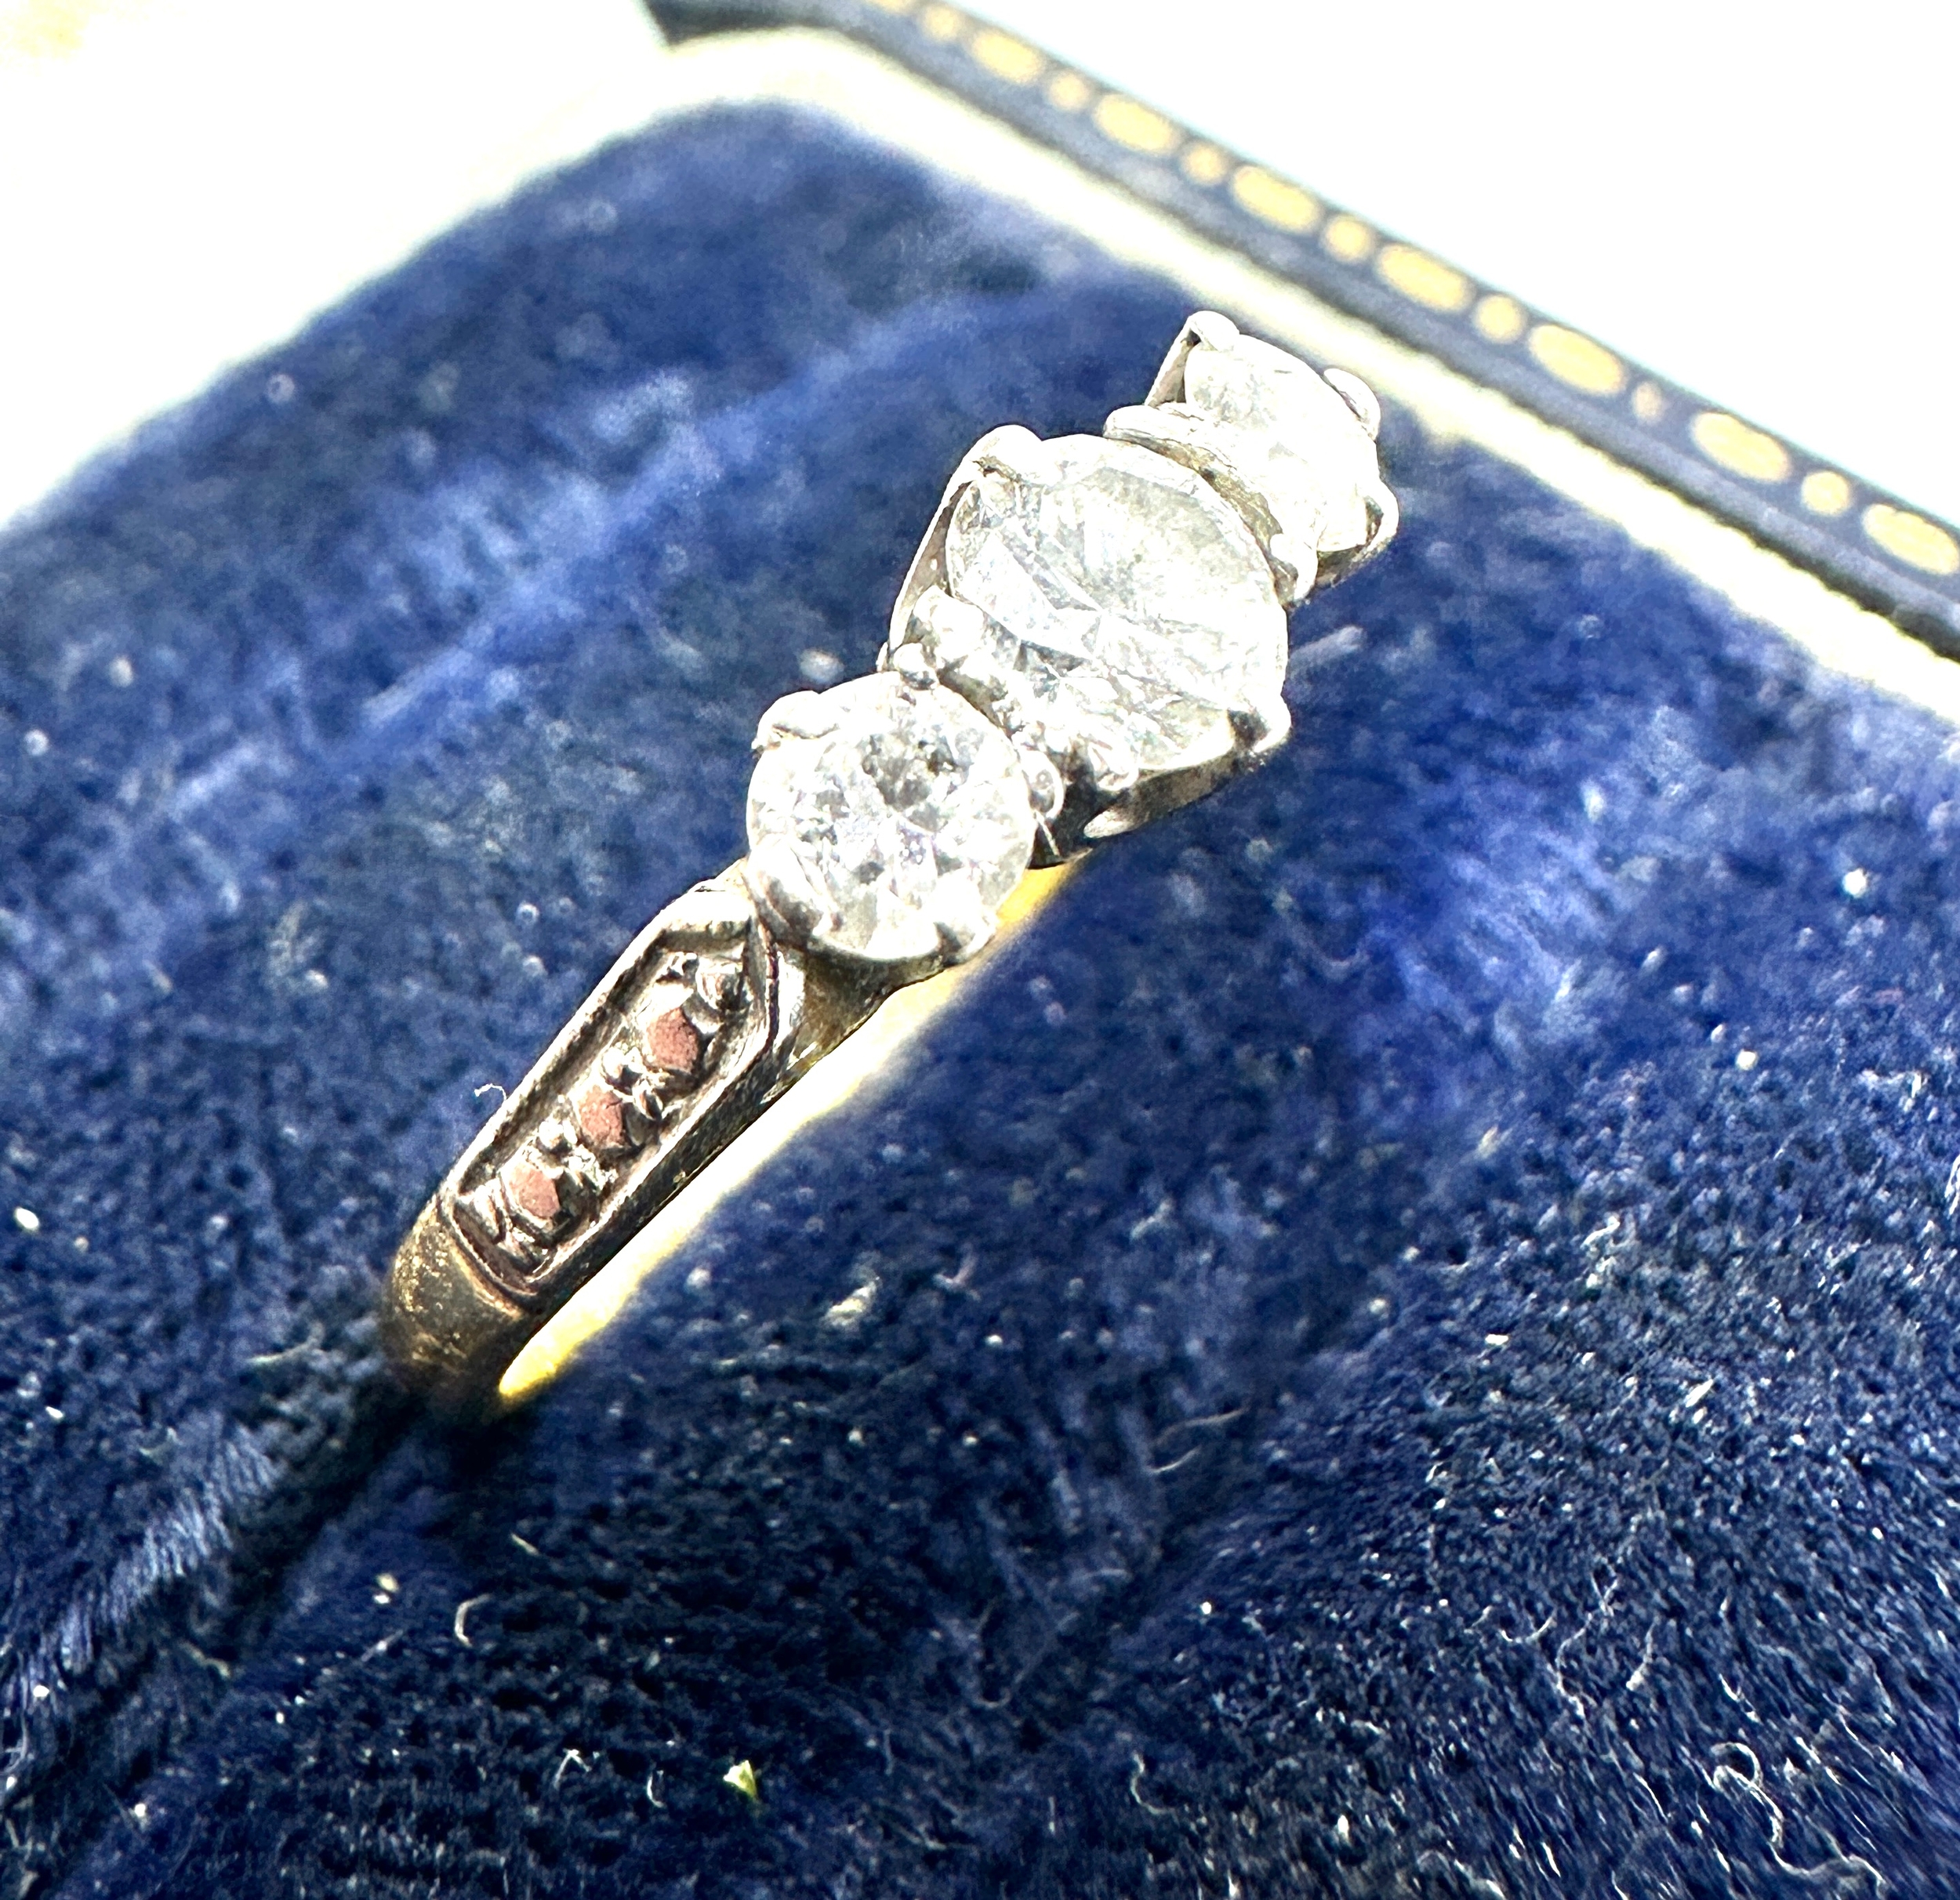 18ct gold 3 stone diamond ring with diamond shoulders weight 1.6g - Image 2 of 4